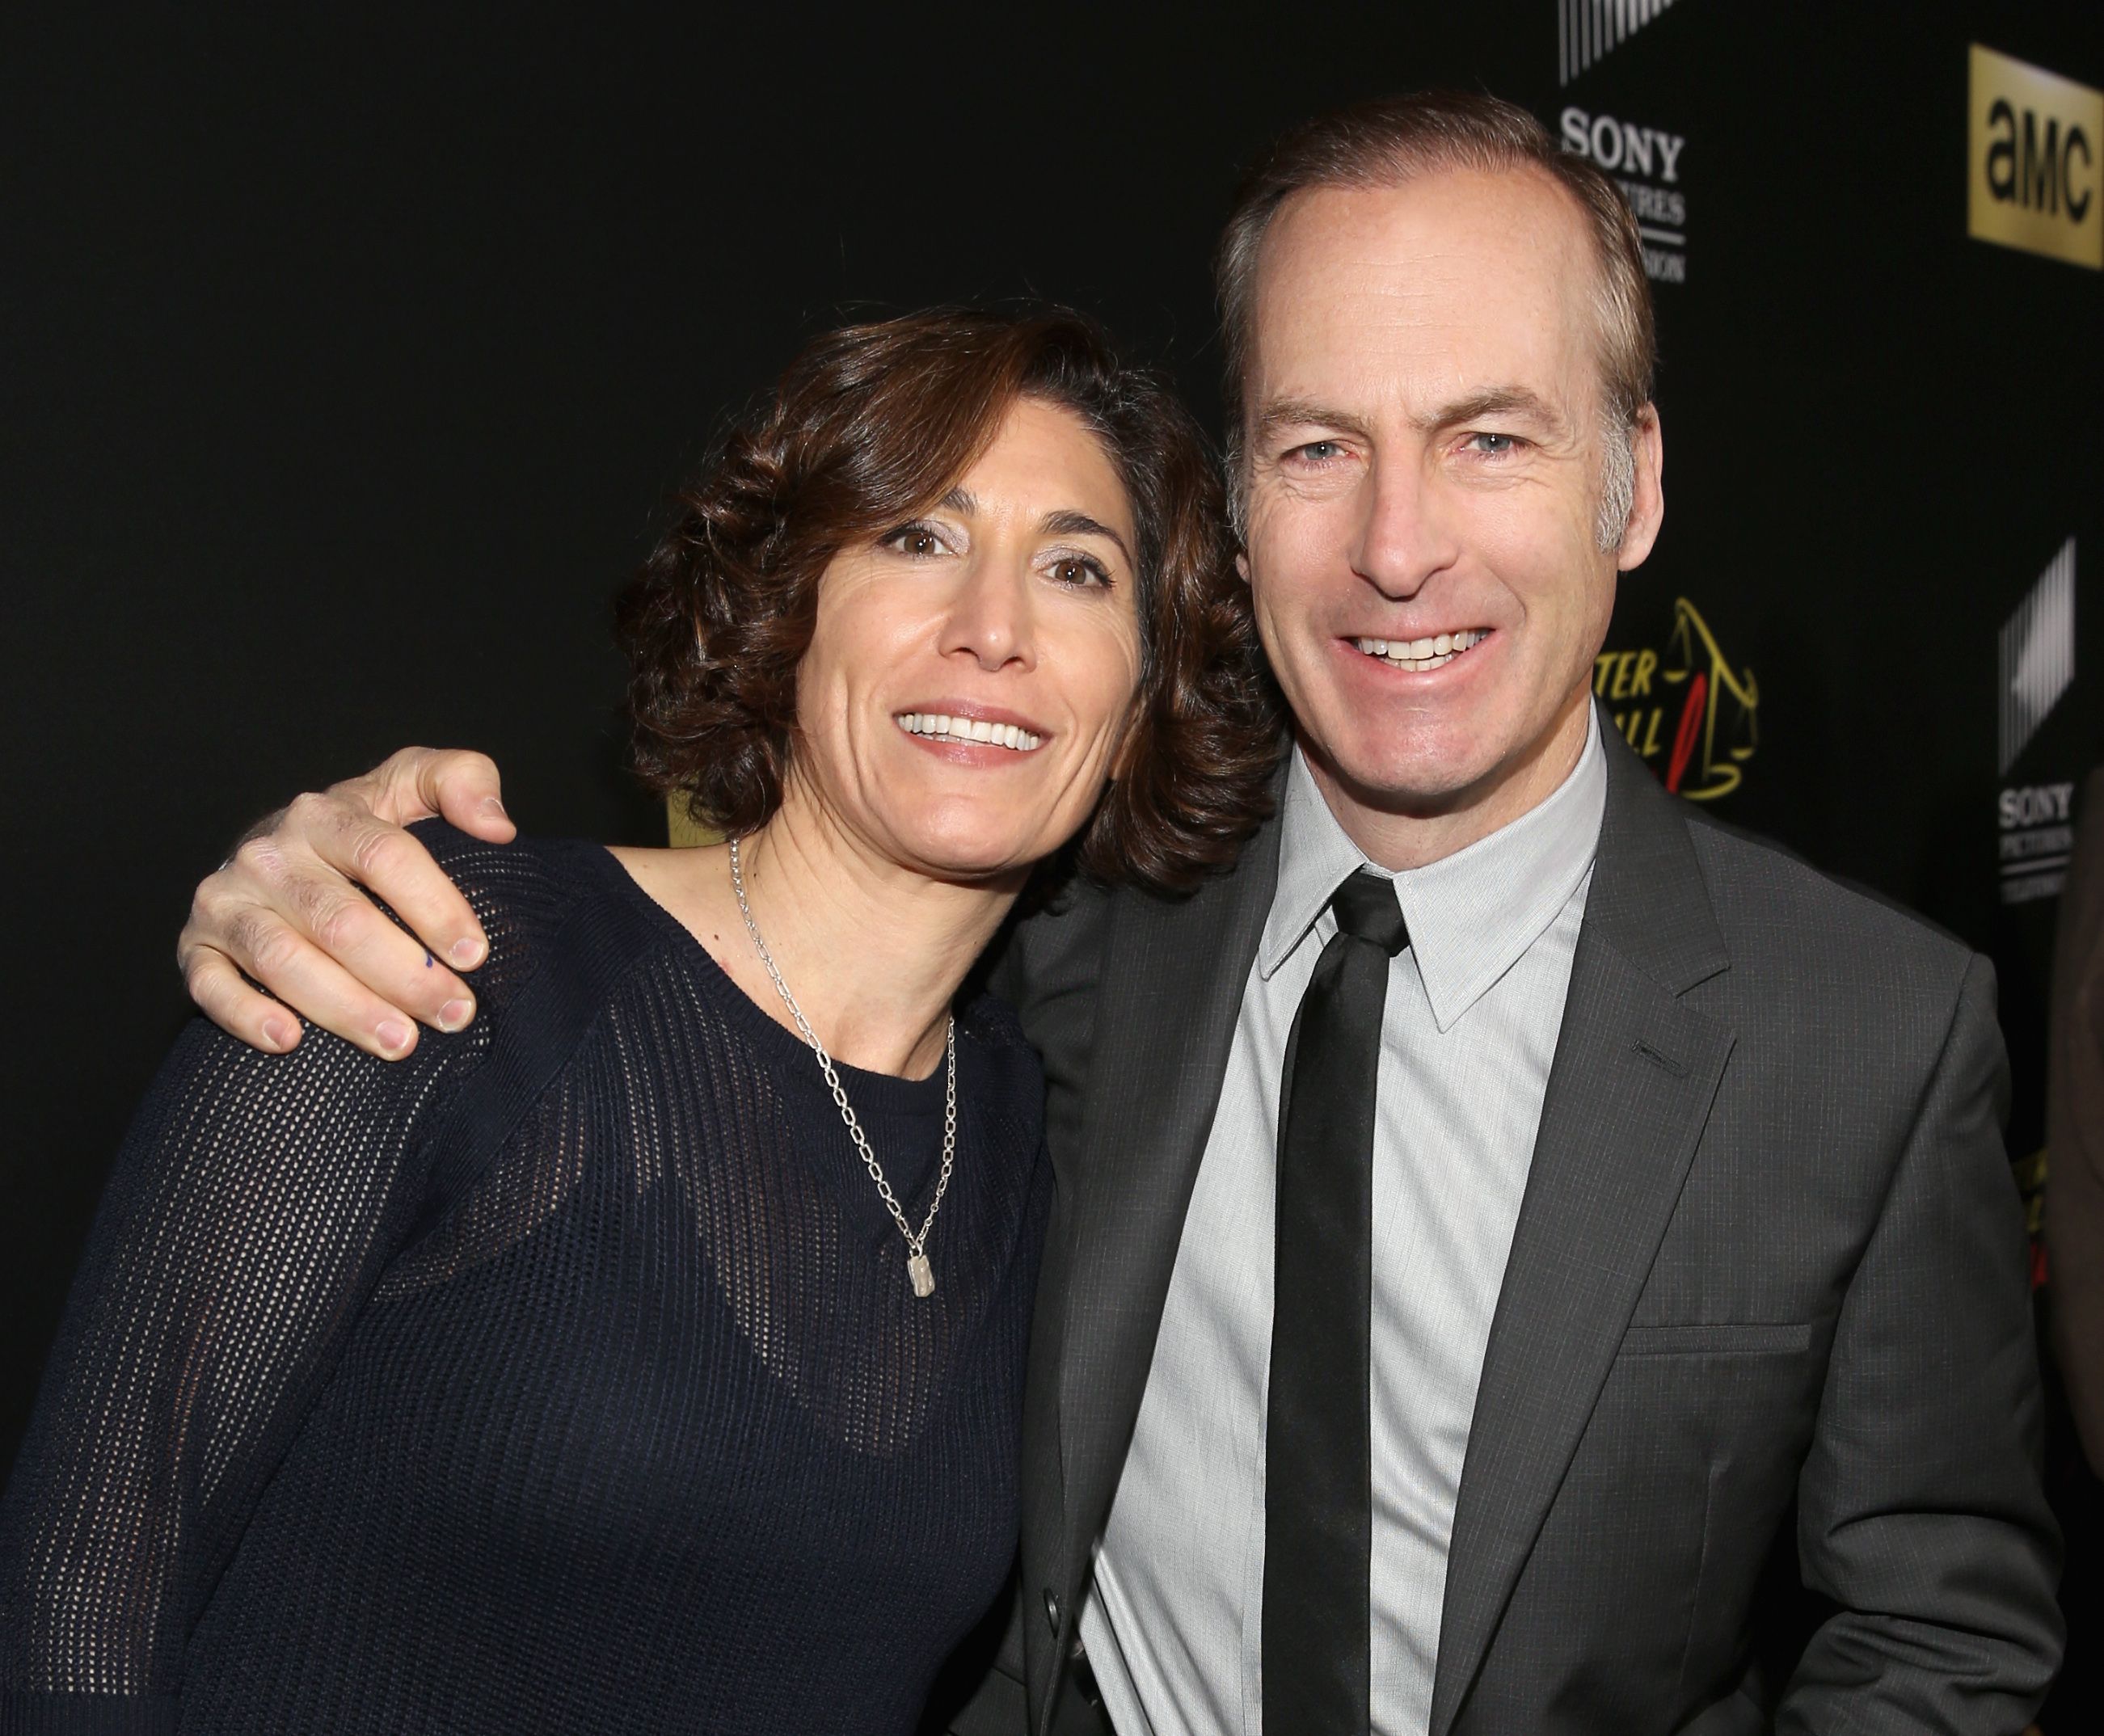 Naomi Odenkirk and Bob Odenkirk during the "Better Call Saul" Season 2 Premiere at Arclight Cinemas Culver City on February 2, 2016, in Culver City, California. | Source: Getty Images